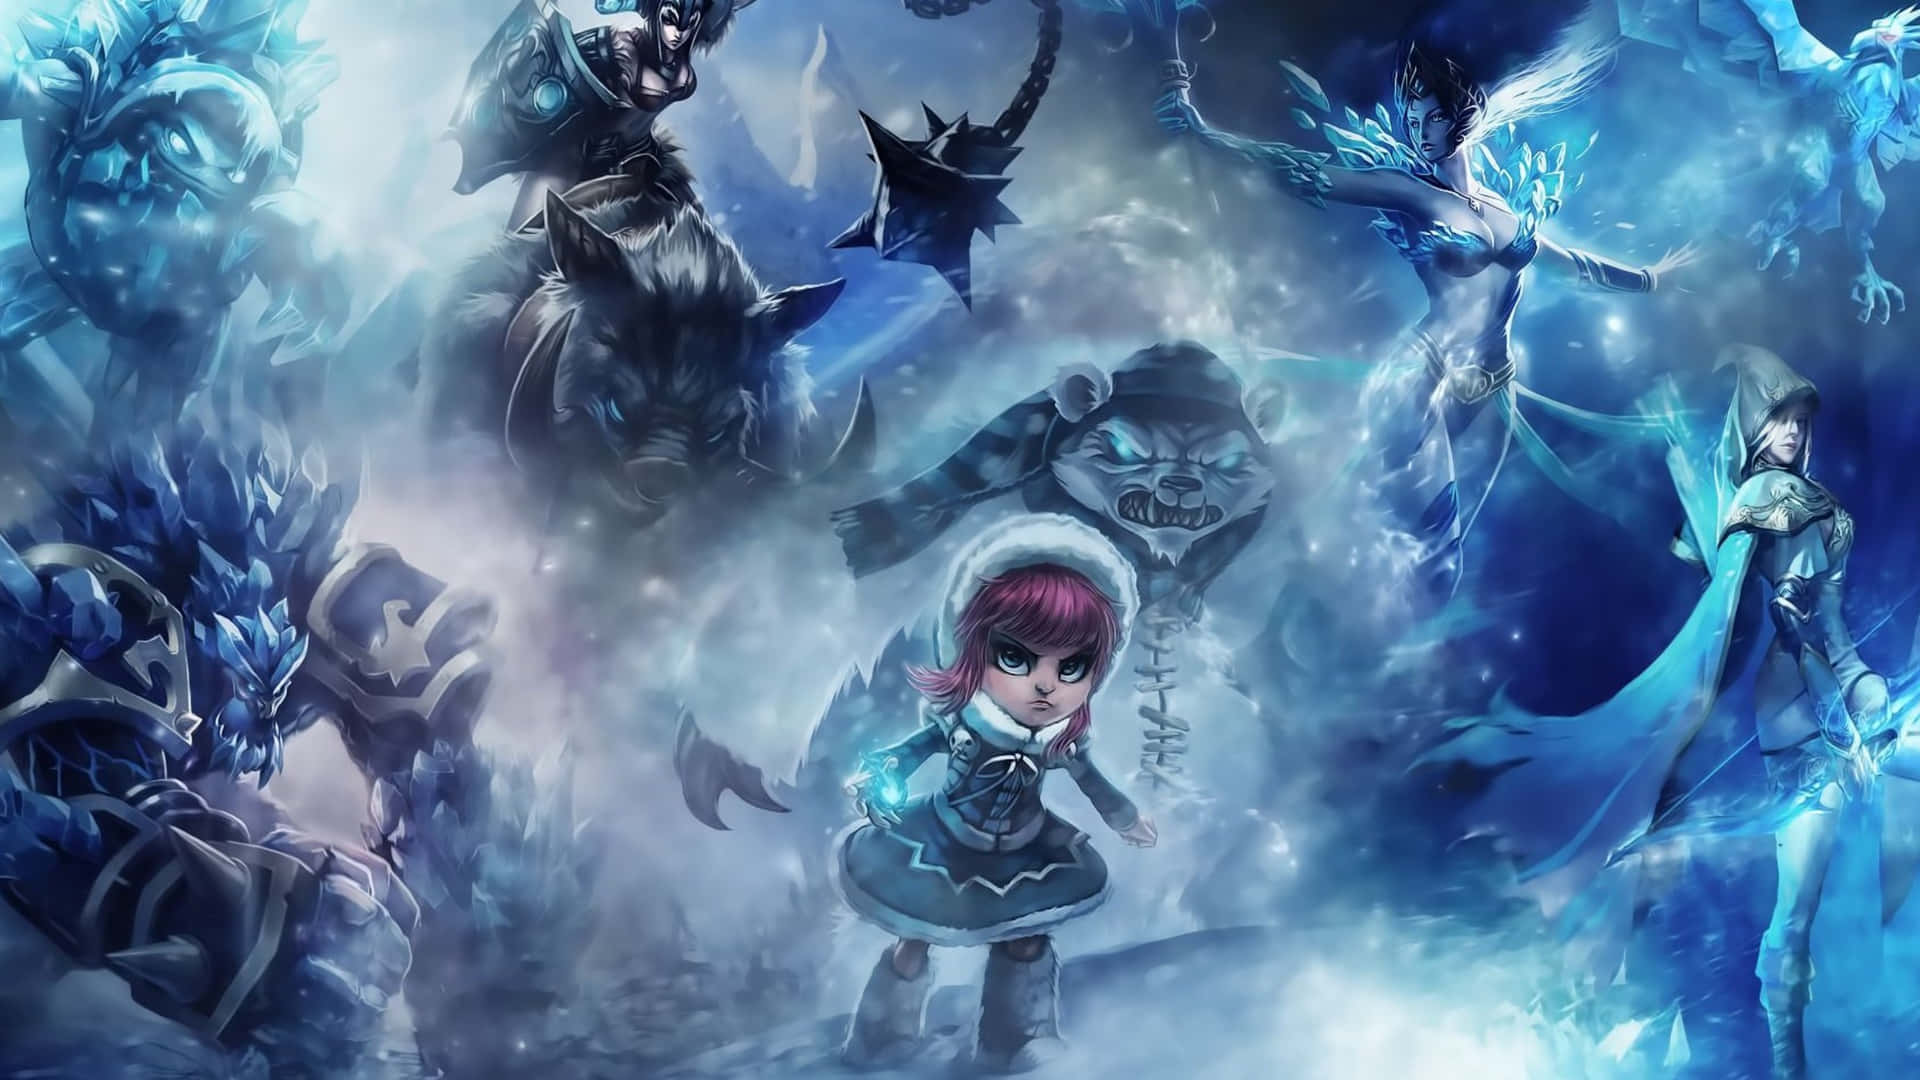 Get Ready To Conquer Your Foes in 4K League of Legends